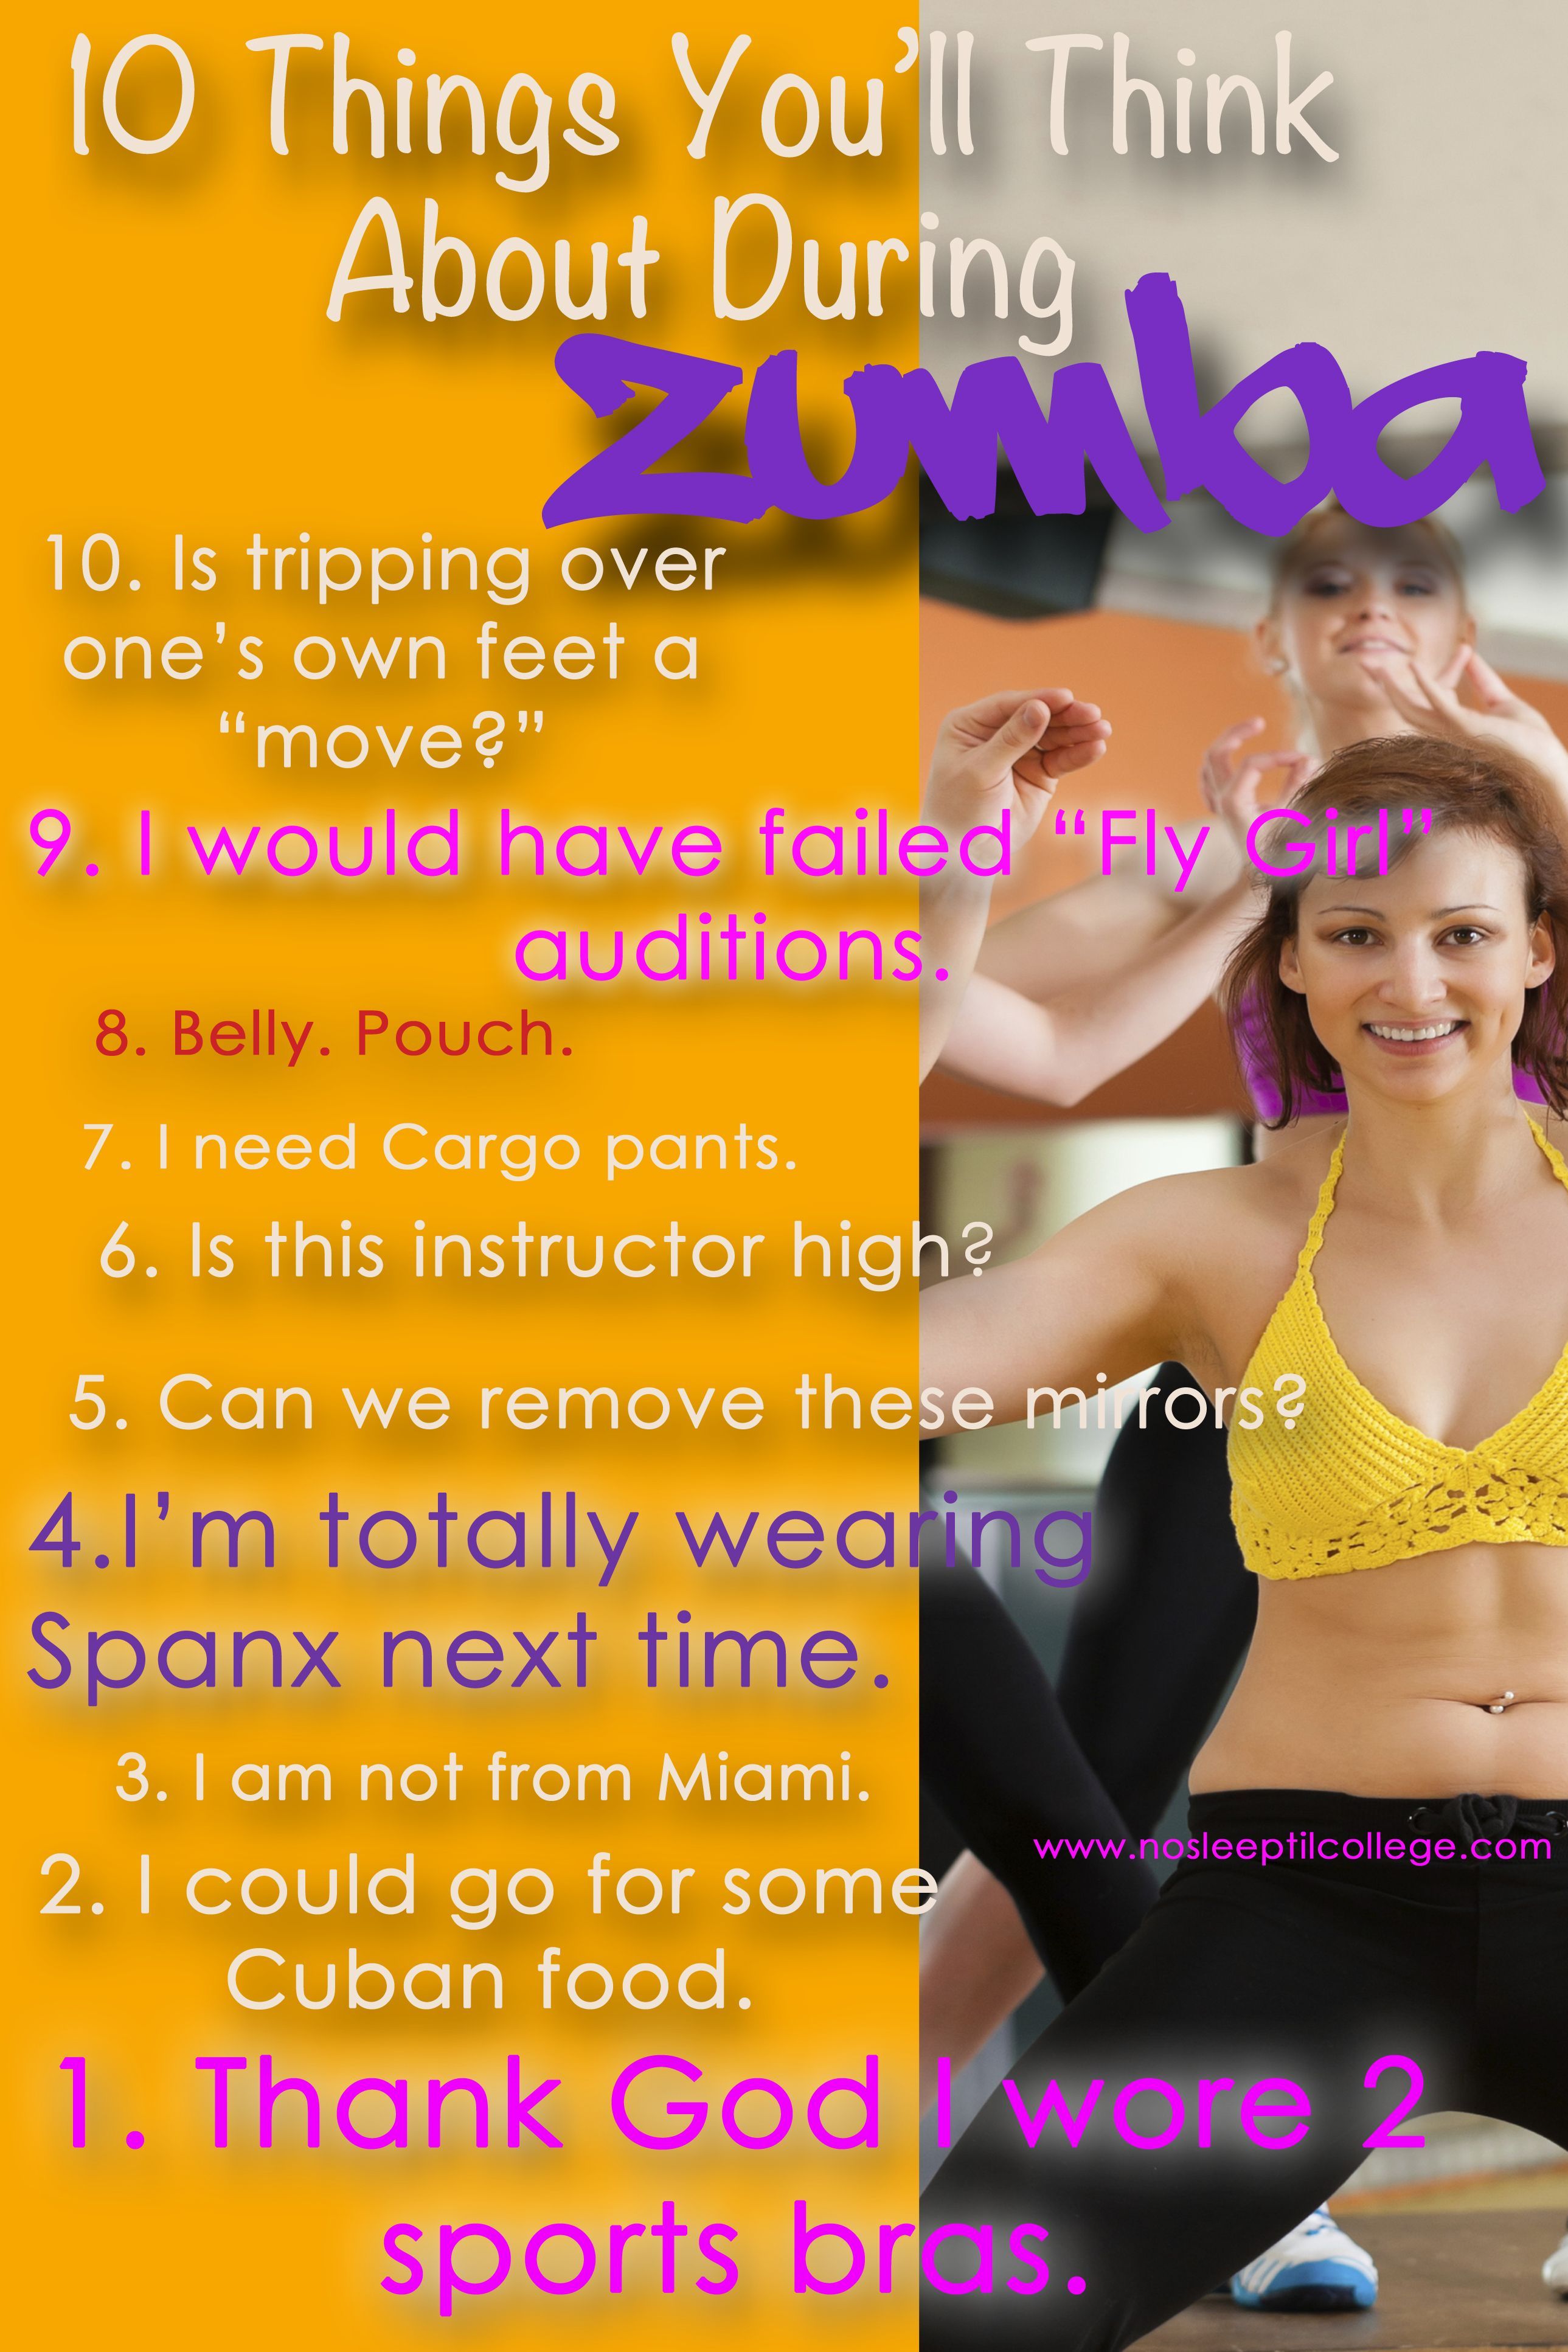 Have you taken a Zumba class? Here are 10 things I learned from Zumba! #zumba